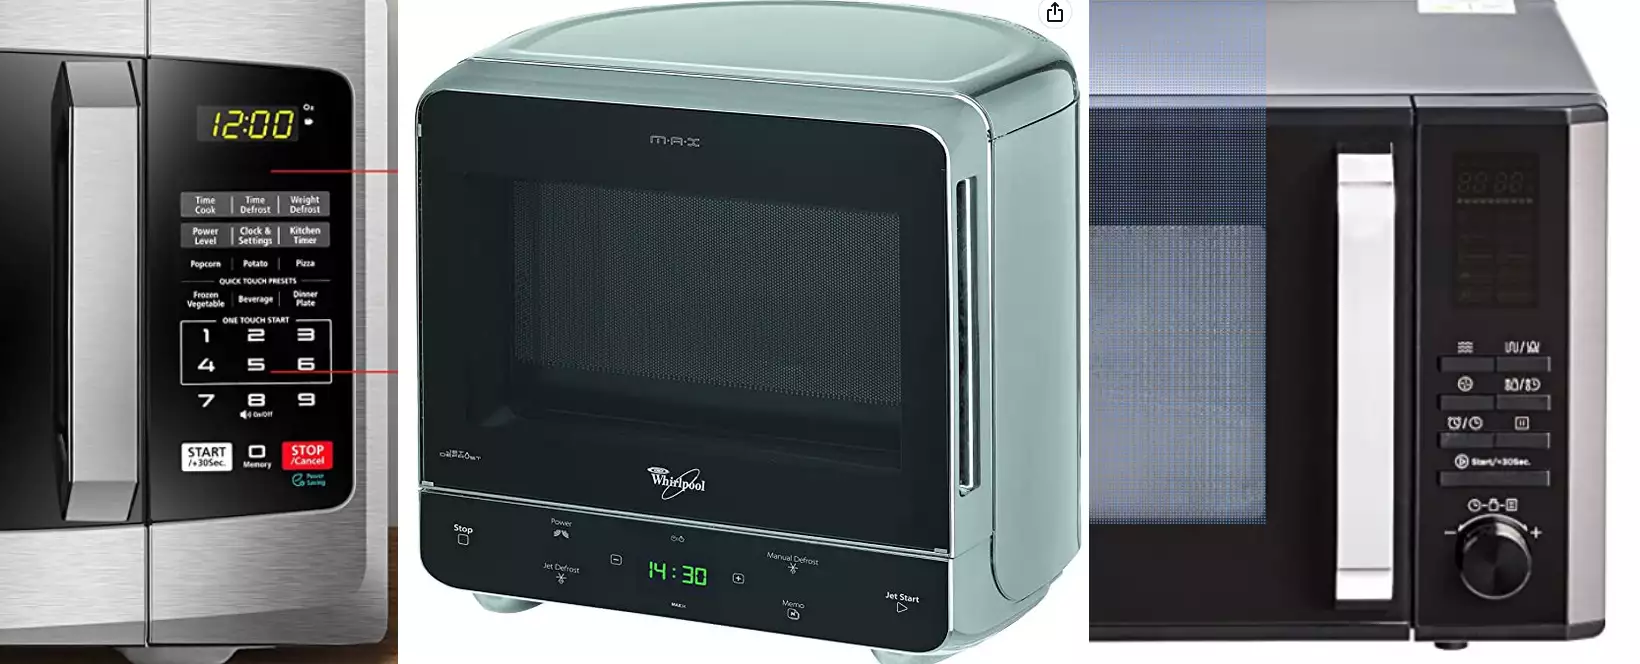 Collage of three microwave oven interfaces, showing complex buttons with unintuitive icons, small fonts and no obvious shortcuts for core interactions